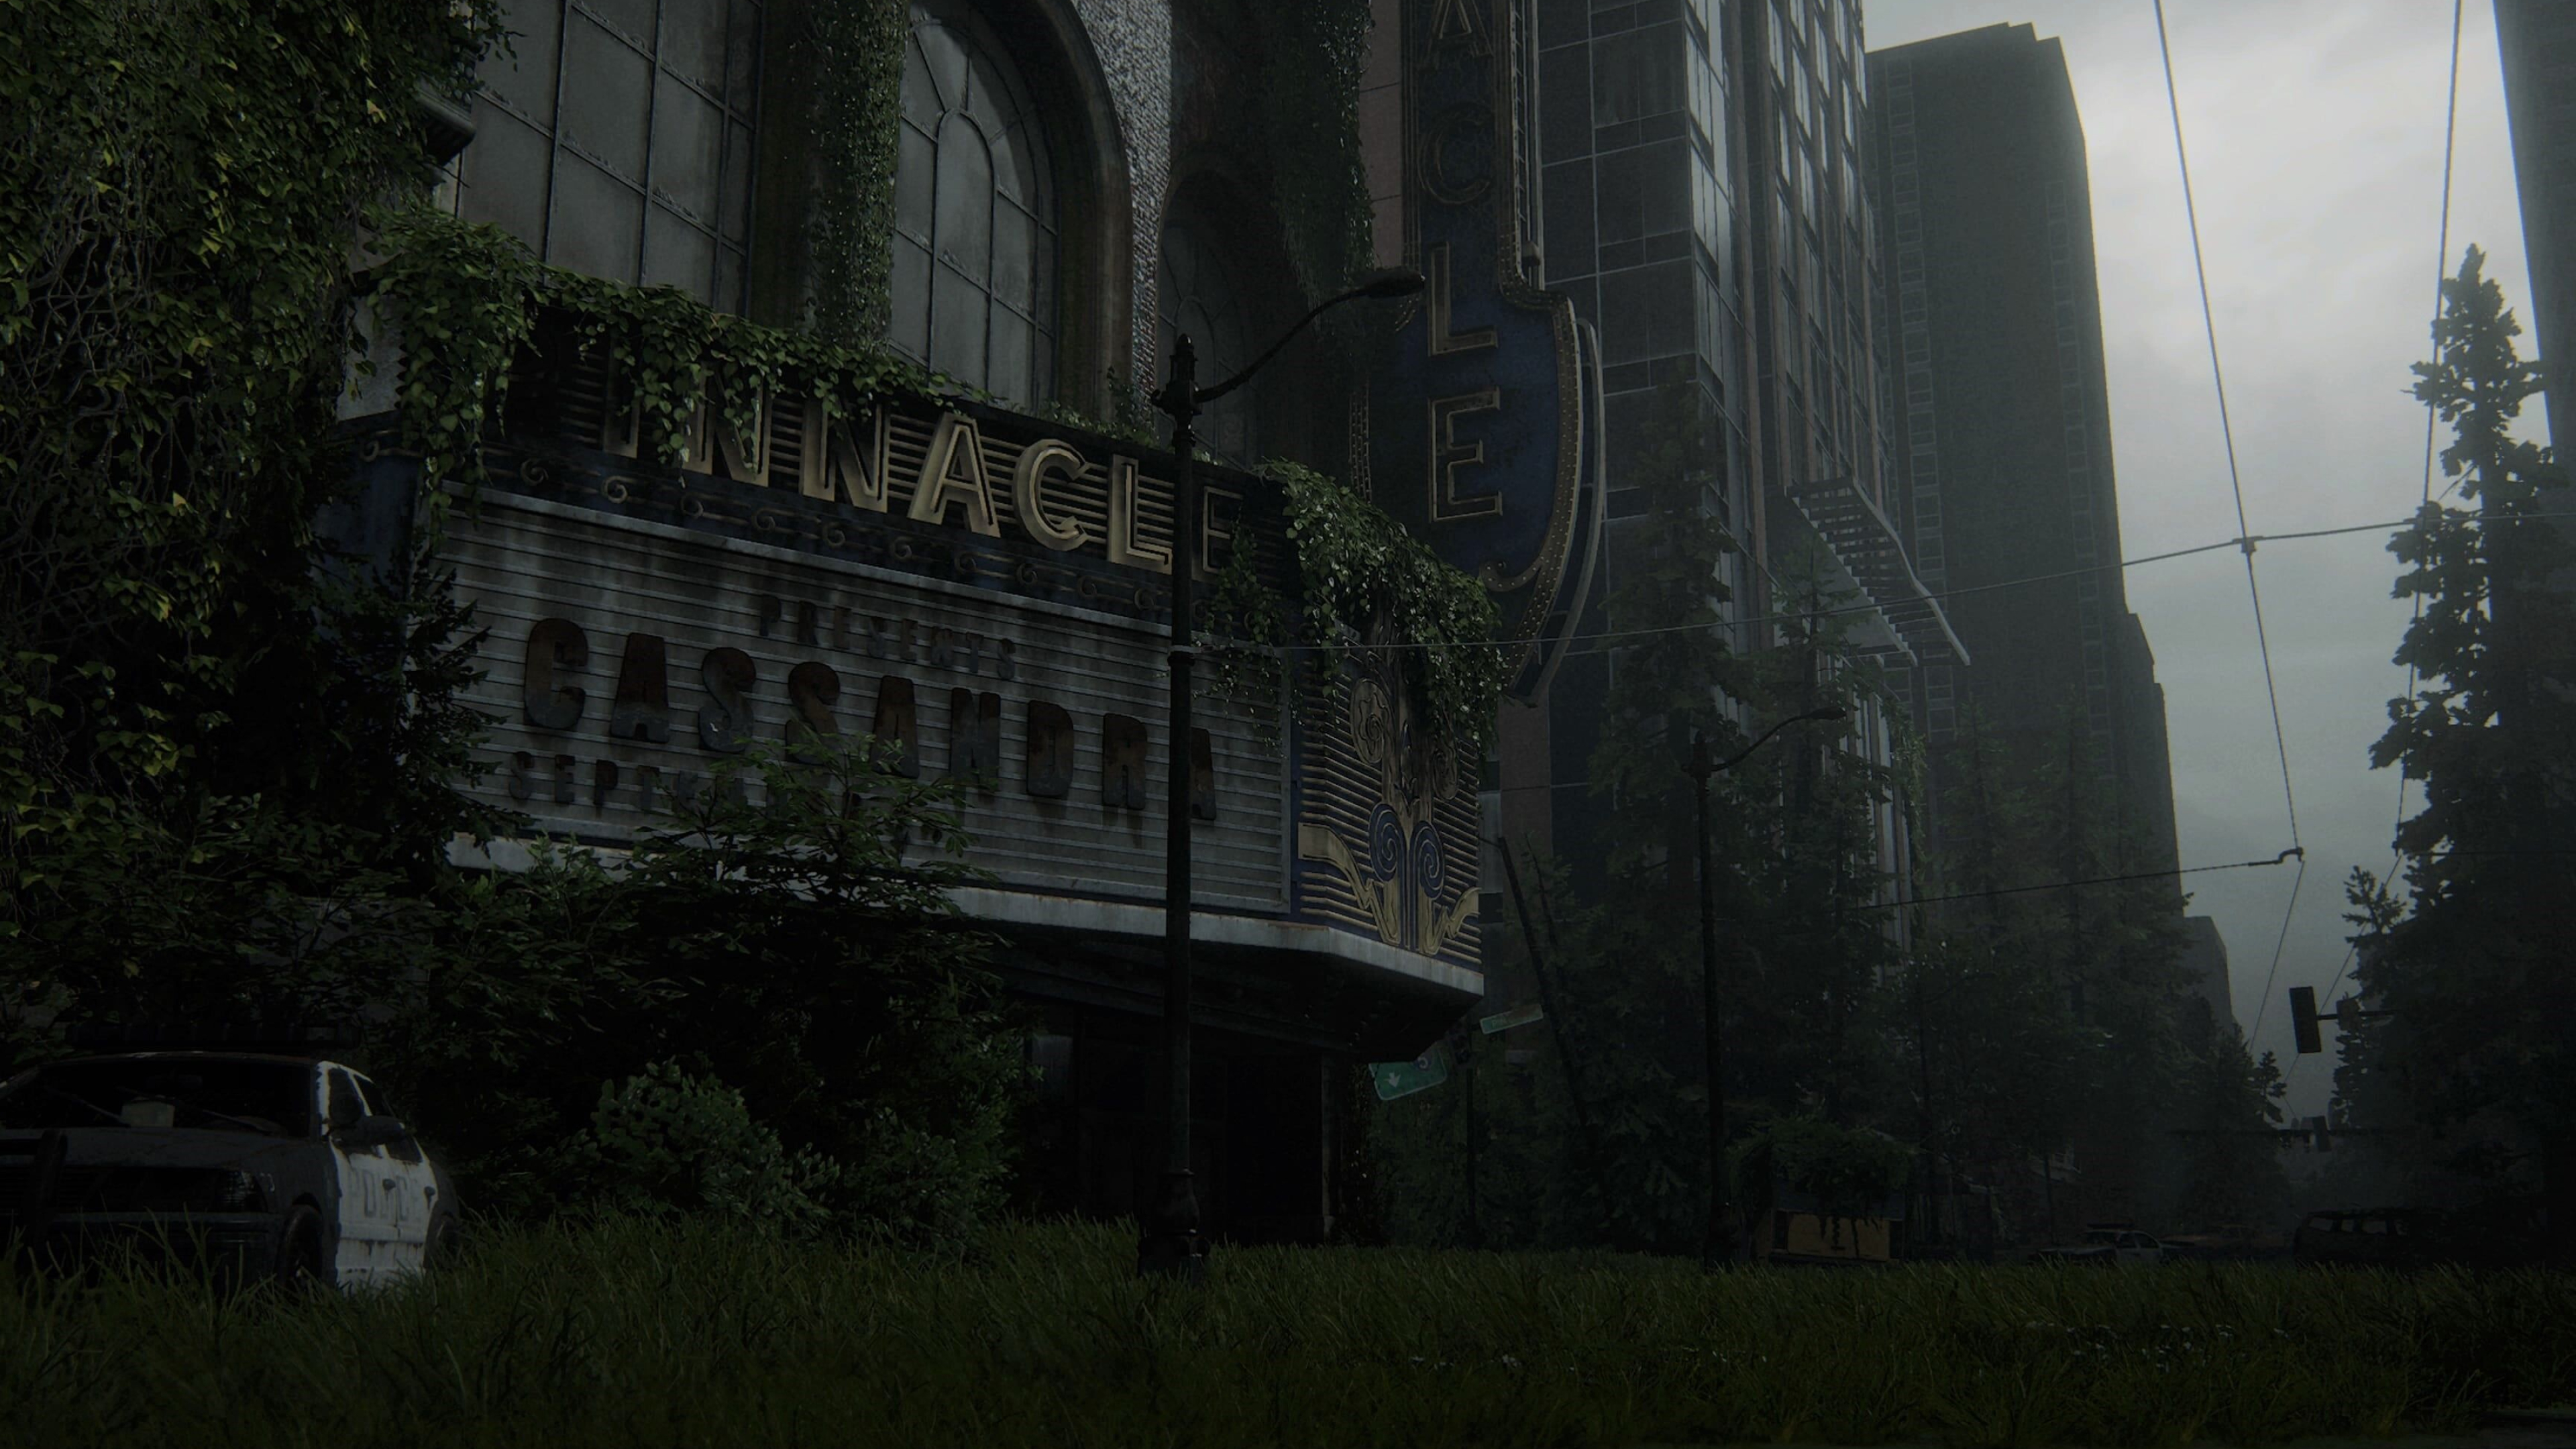 Ghost Town: An abandoned post-apocalypse city in The Last of Us video game by Naughty Dog. 3840x2160 4K Wallpaper.